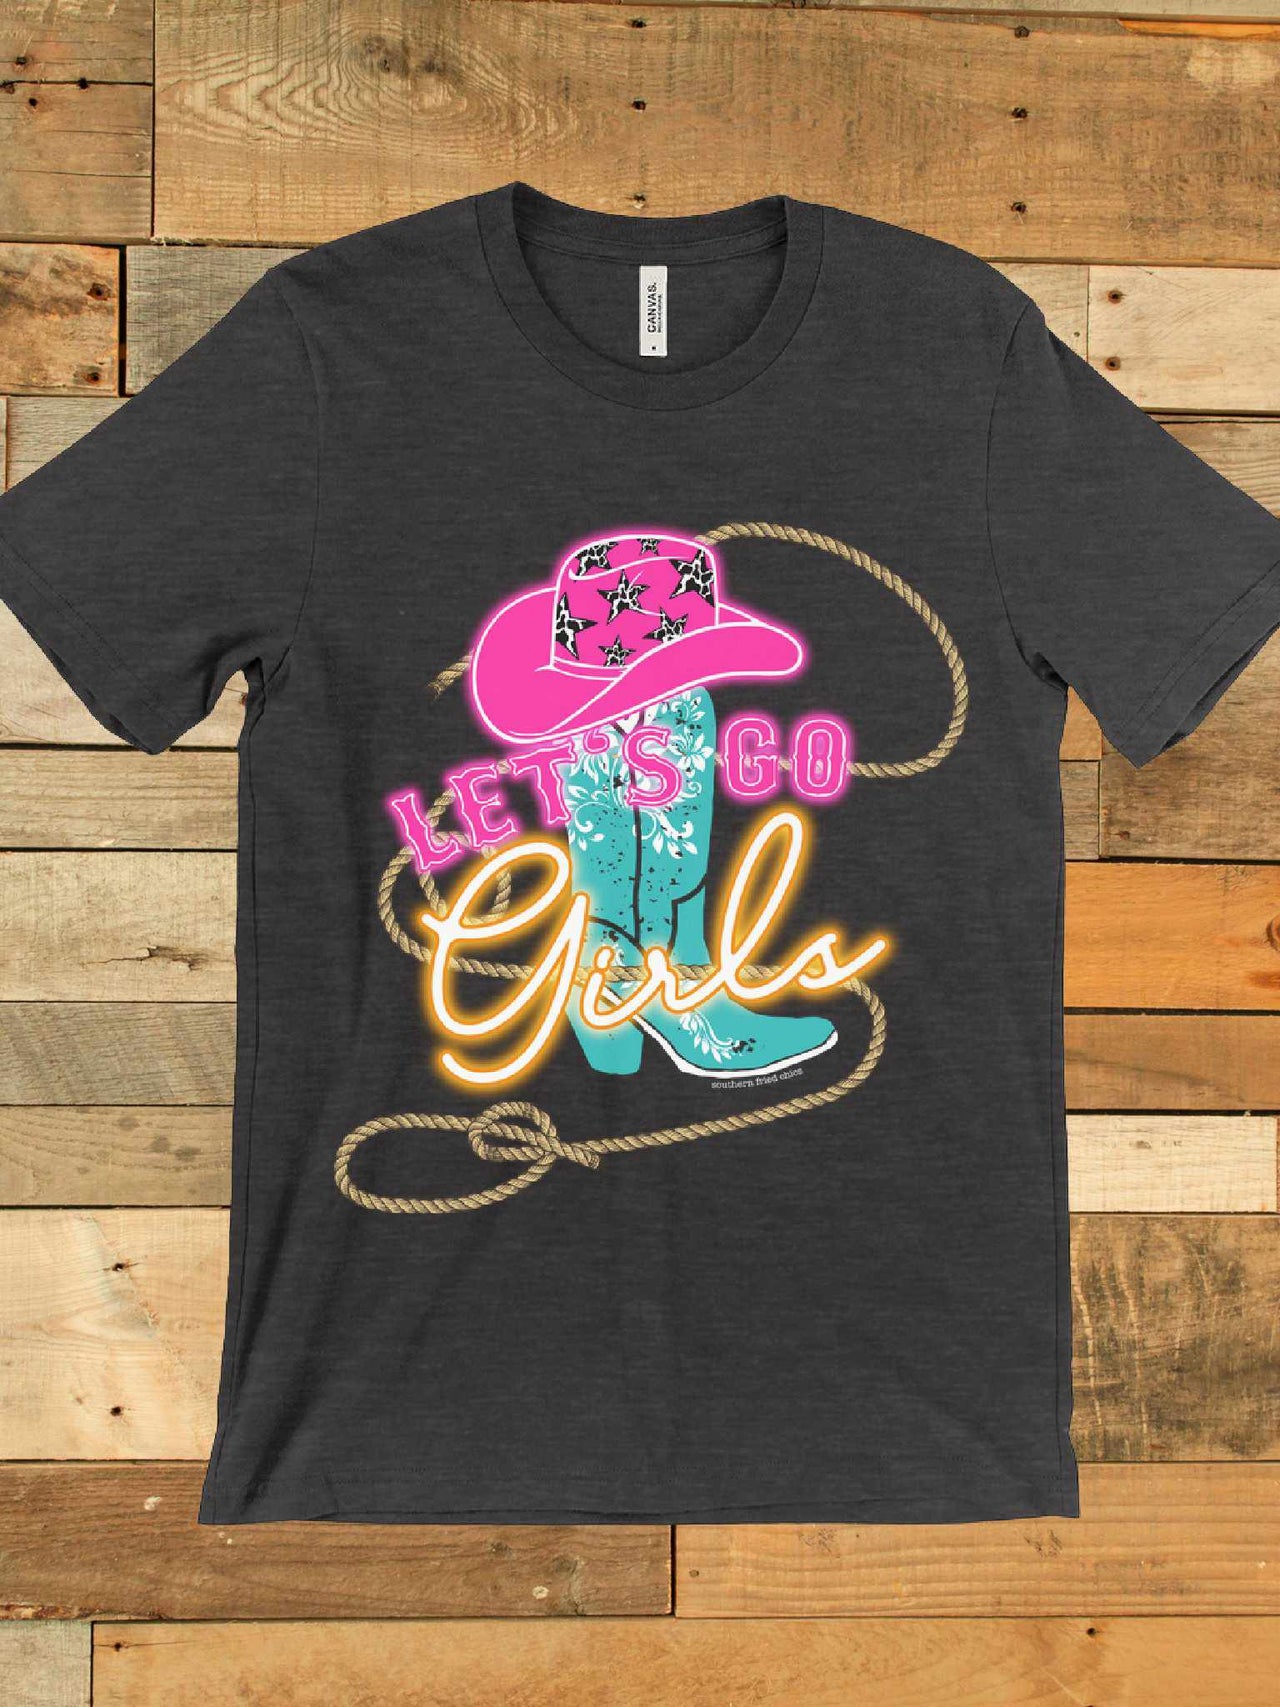 Let's Go Girls Tee-Southern Fried Chics